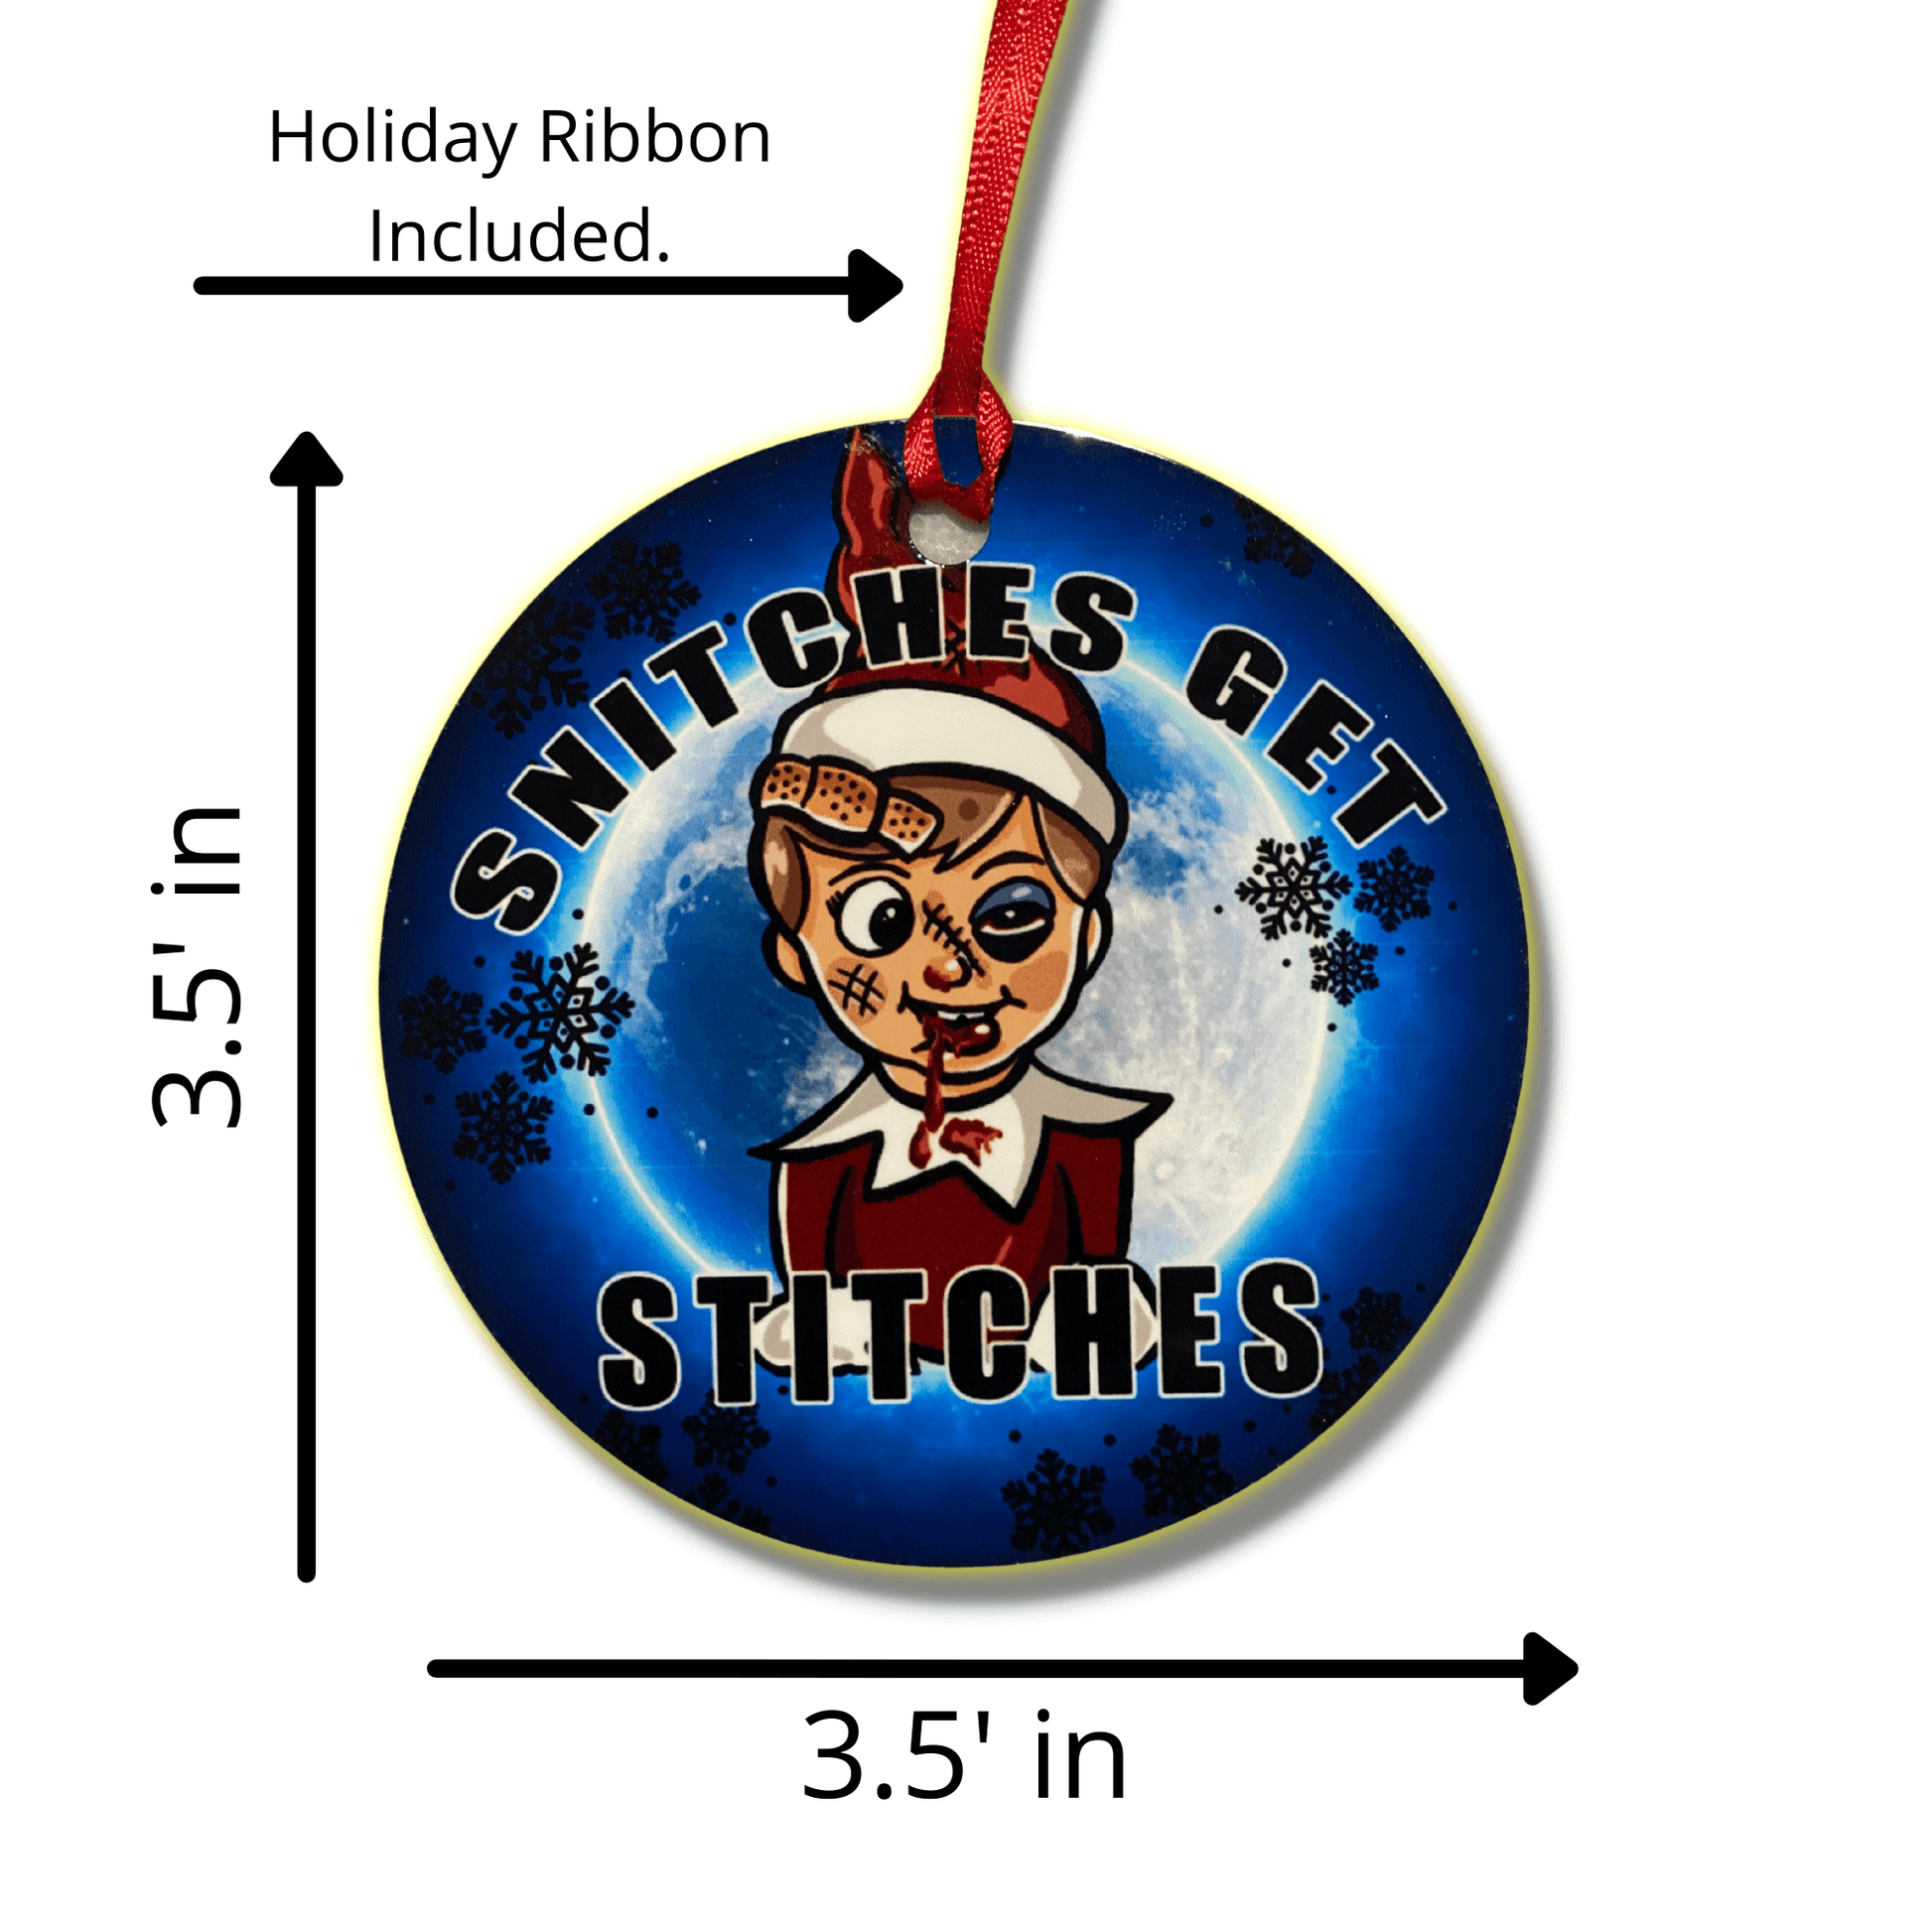 Snitches Get Stitches Funny Christmas Ornament 6